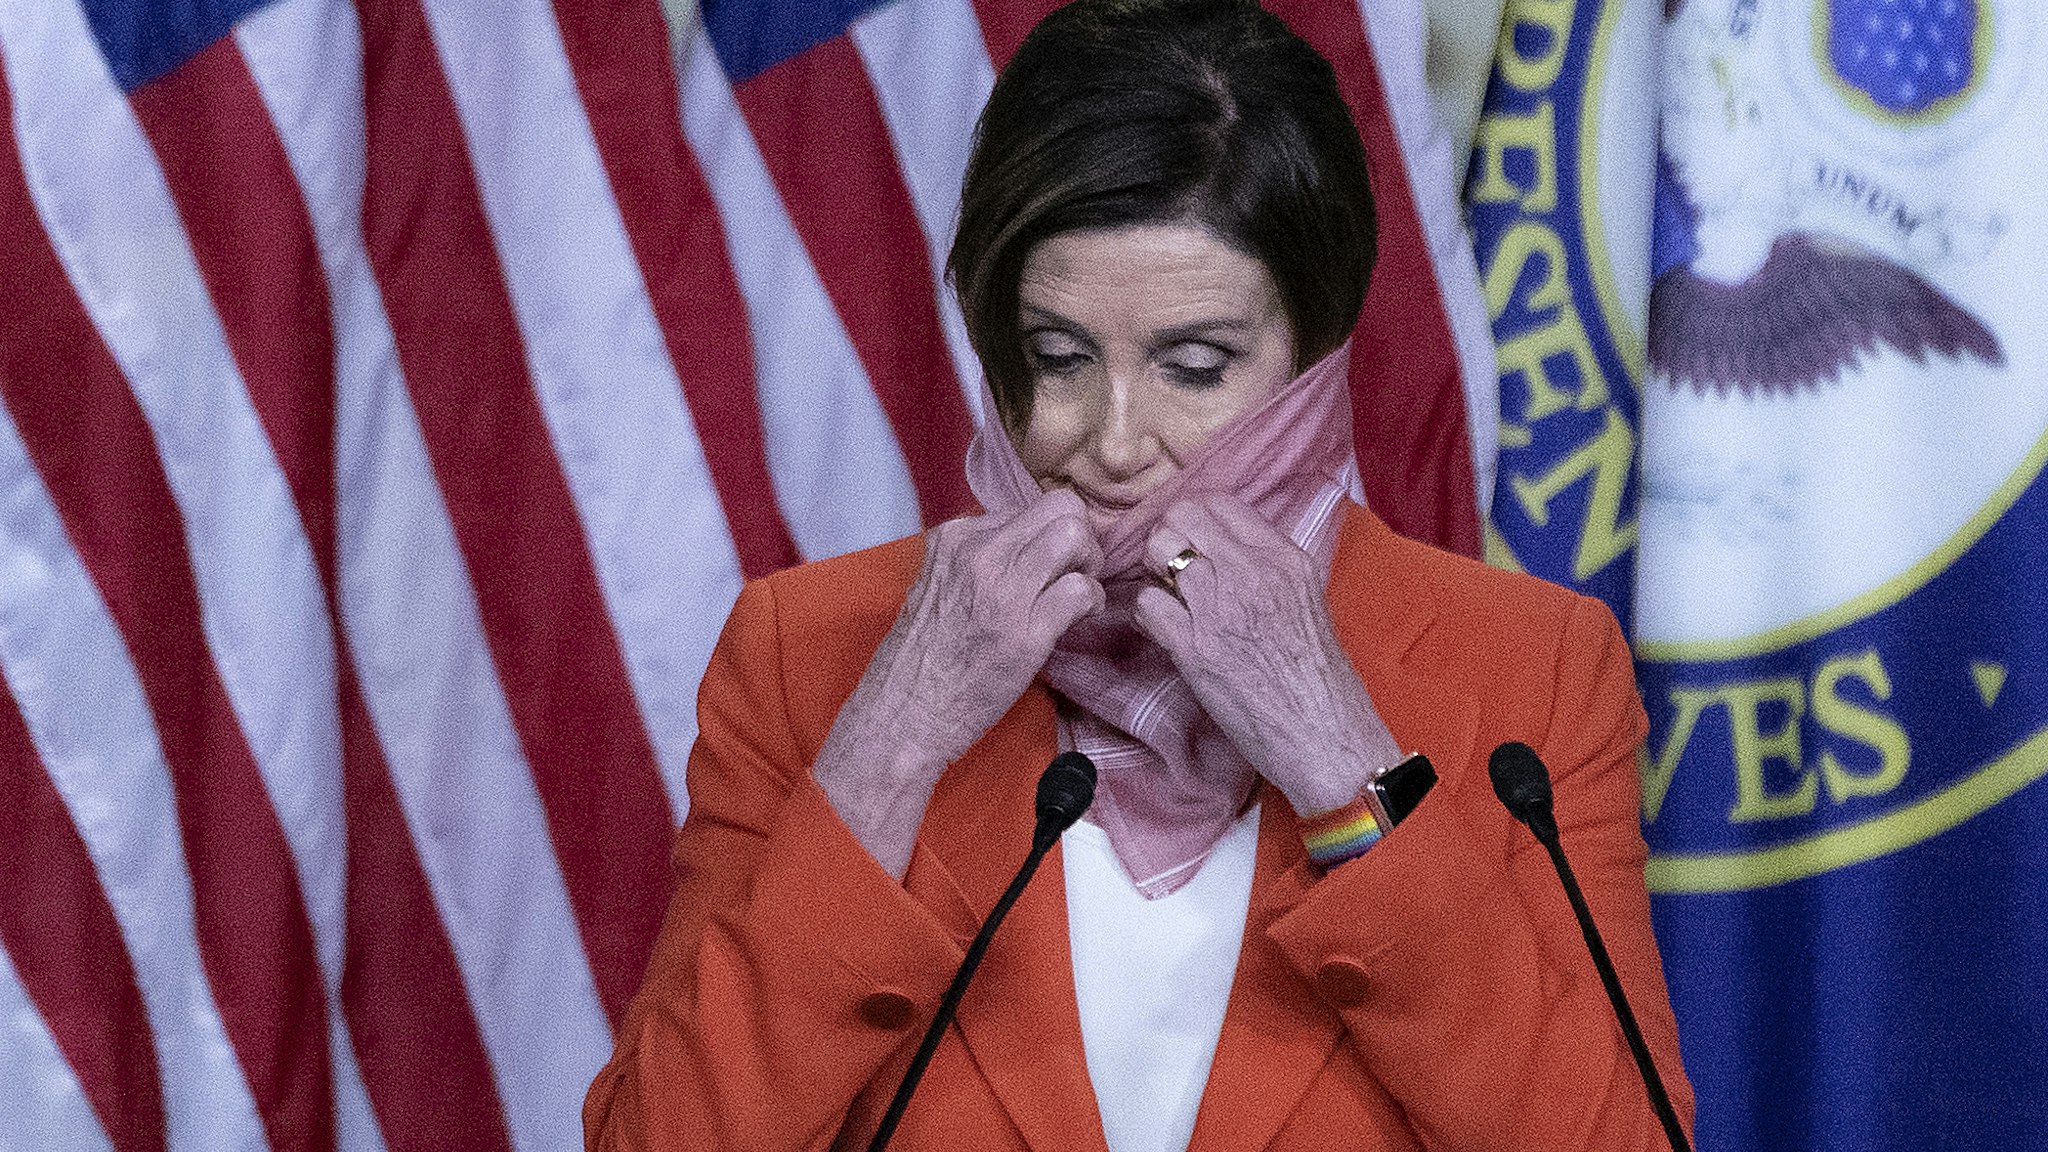 WASHINGTON, DC - APRIL 24: Speaker of the House Nancy Pelosi (D-CA) pulls down her scarf as she beings her weekly news conference during the novel coronavirus pandemic at the U.S. Capitol April 24, 2020 in Washington, DC. President Donald Trump is expected to sign a bipartisan $484 billion coronavirus relief package to restart a depleted small business loan program and to provide funds for hospitals and COVID-19 testing. (Photo by Chip Somodevilla/Getty Images)